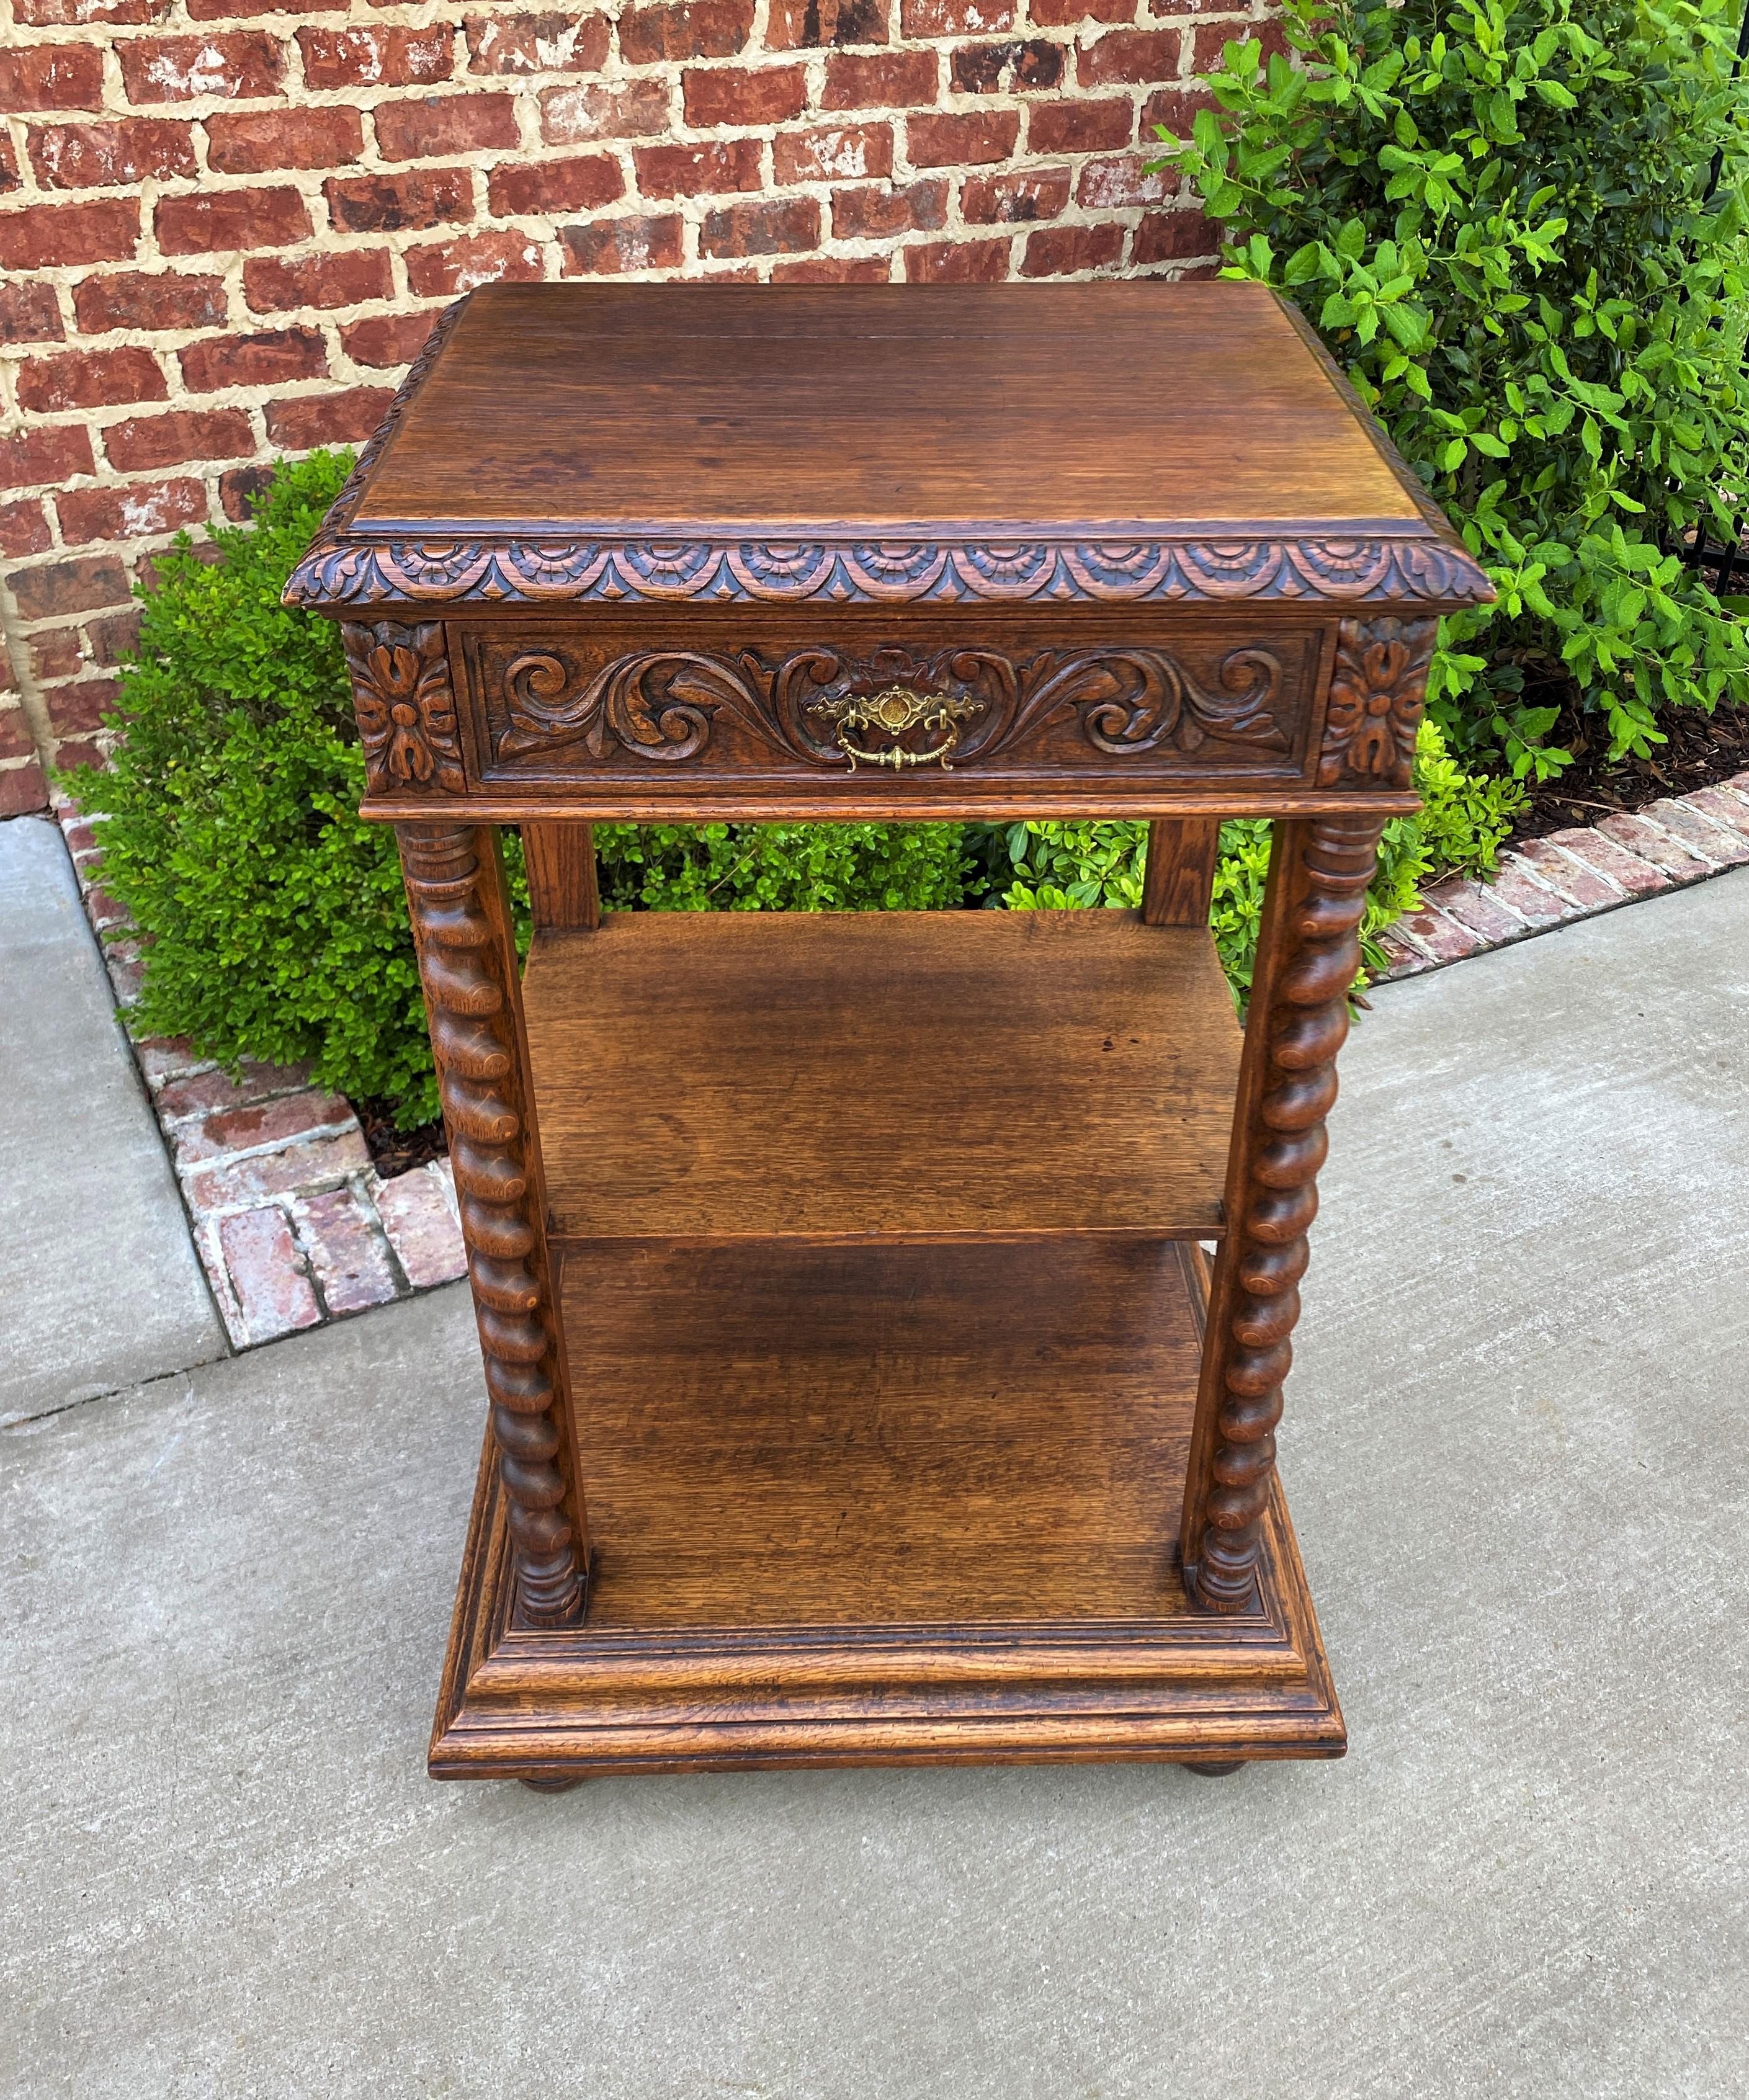 Oak Tall Antique French Server Pedestal Barley Twist Nightstand Table Drawer 19th C